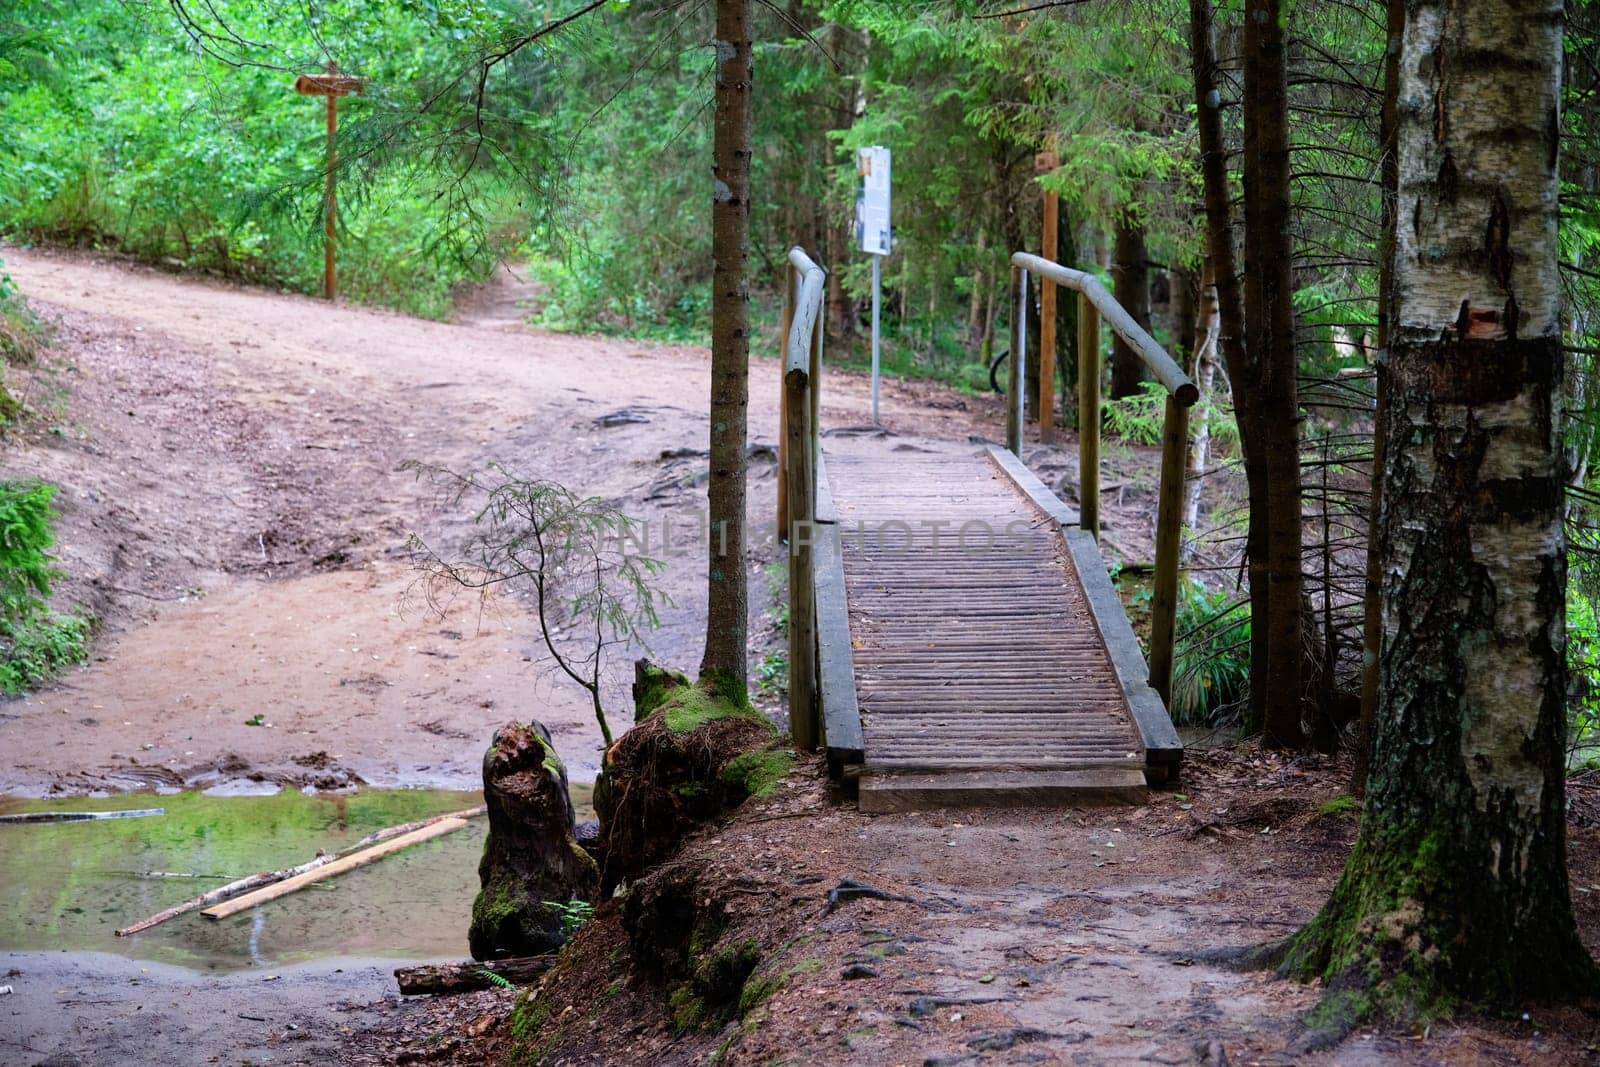 A wooden bridge over a small forest river